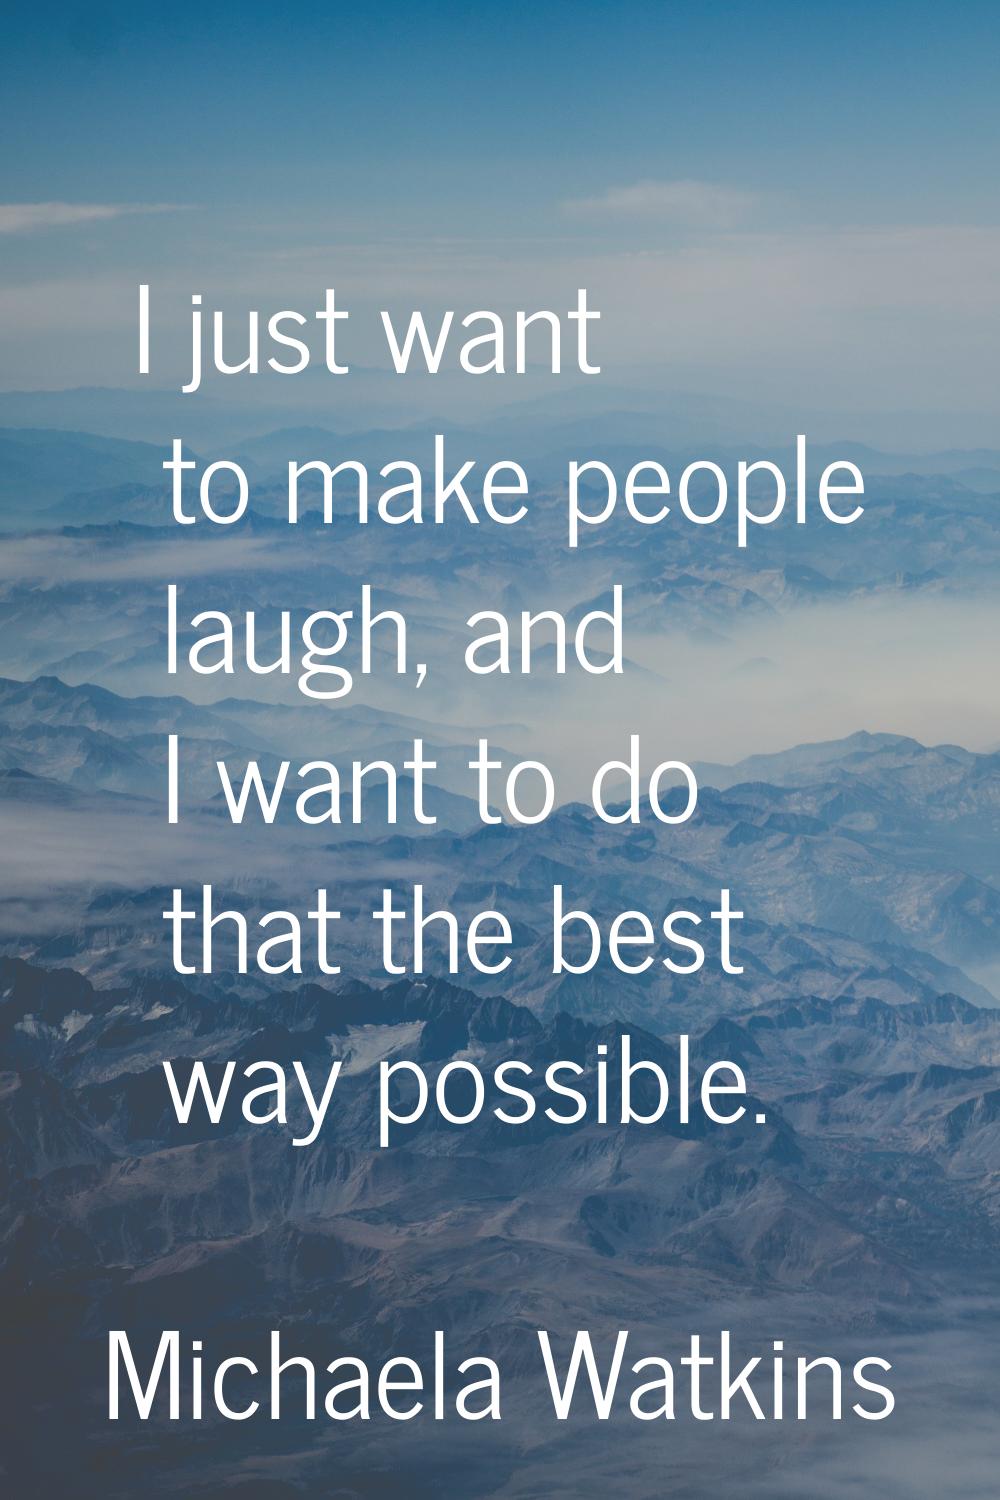 I just want to make people laugh, and I want to do that the best way possible.